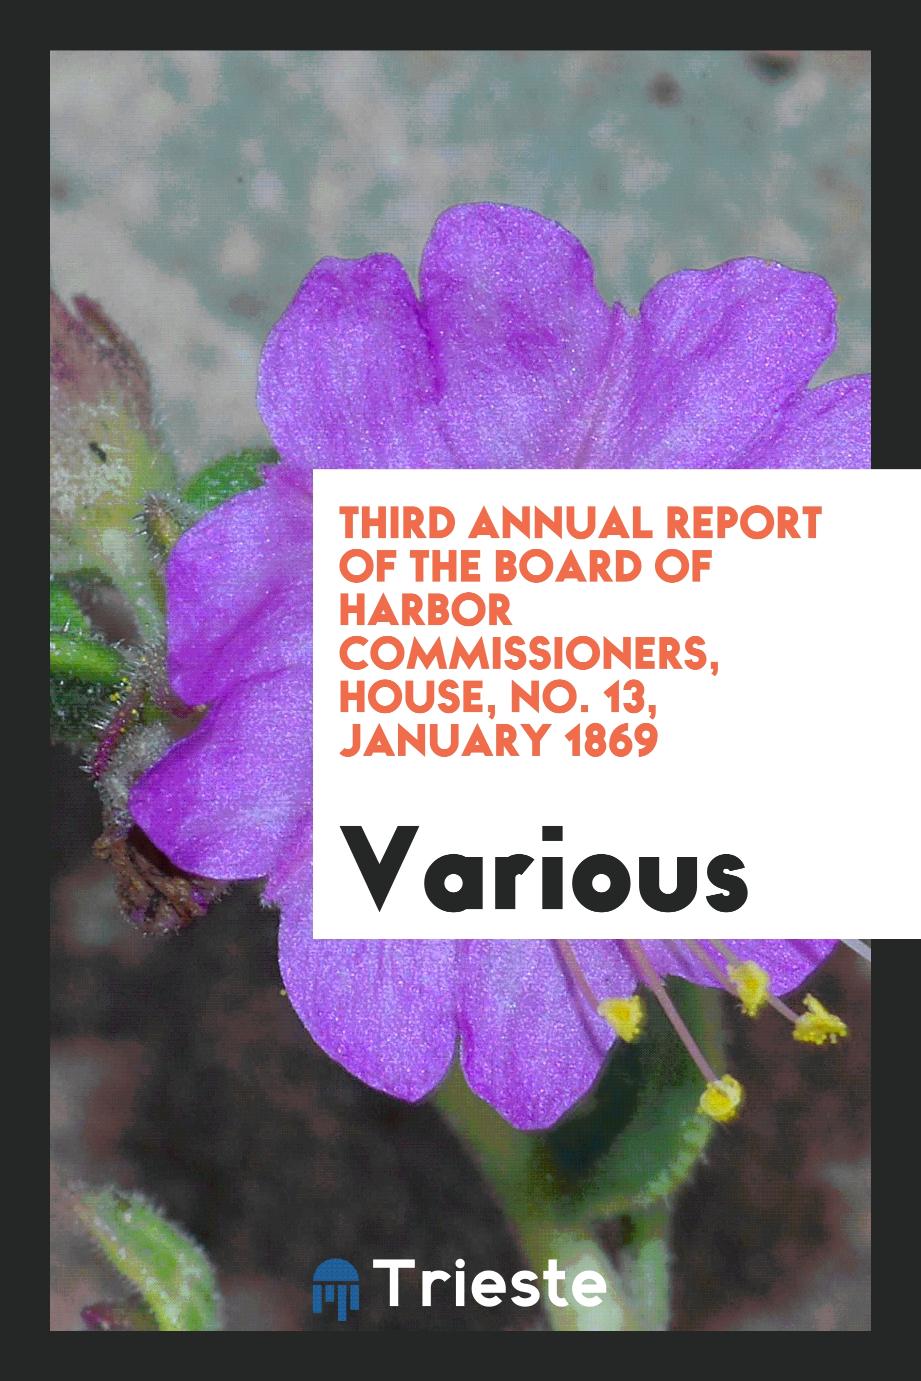 Third Annual report of the Board of Harbor Commissioners, House, No. 13, January 1869